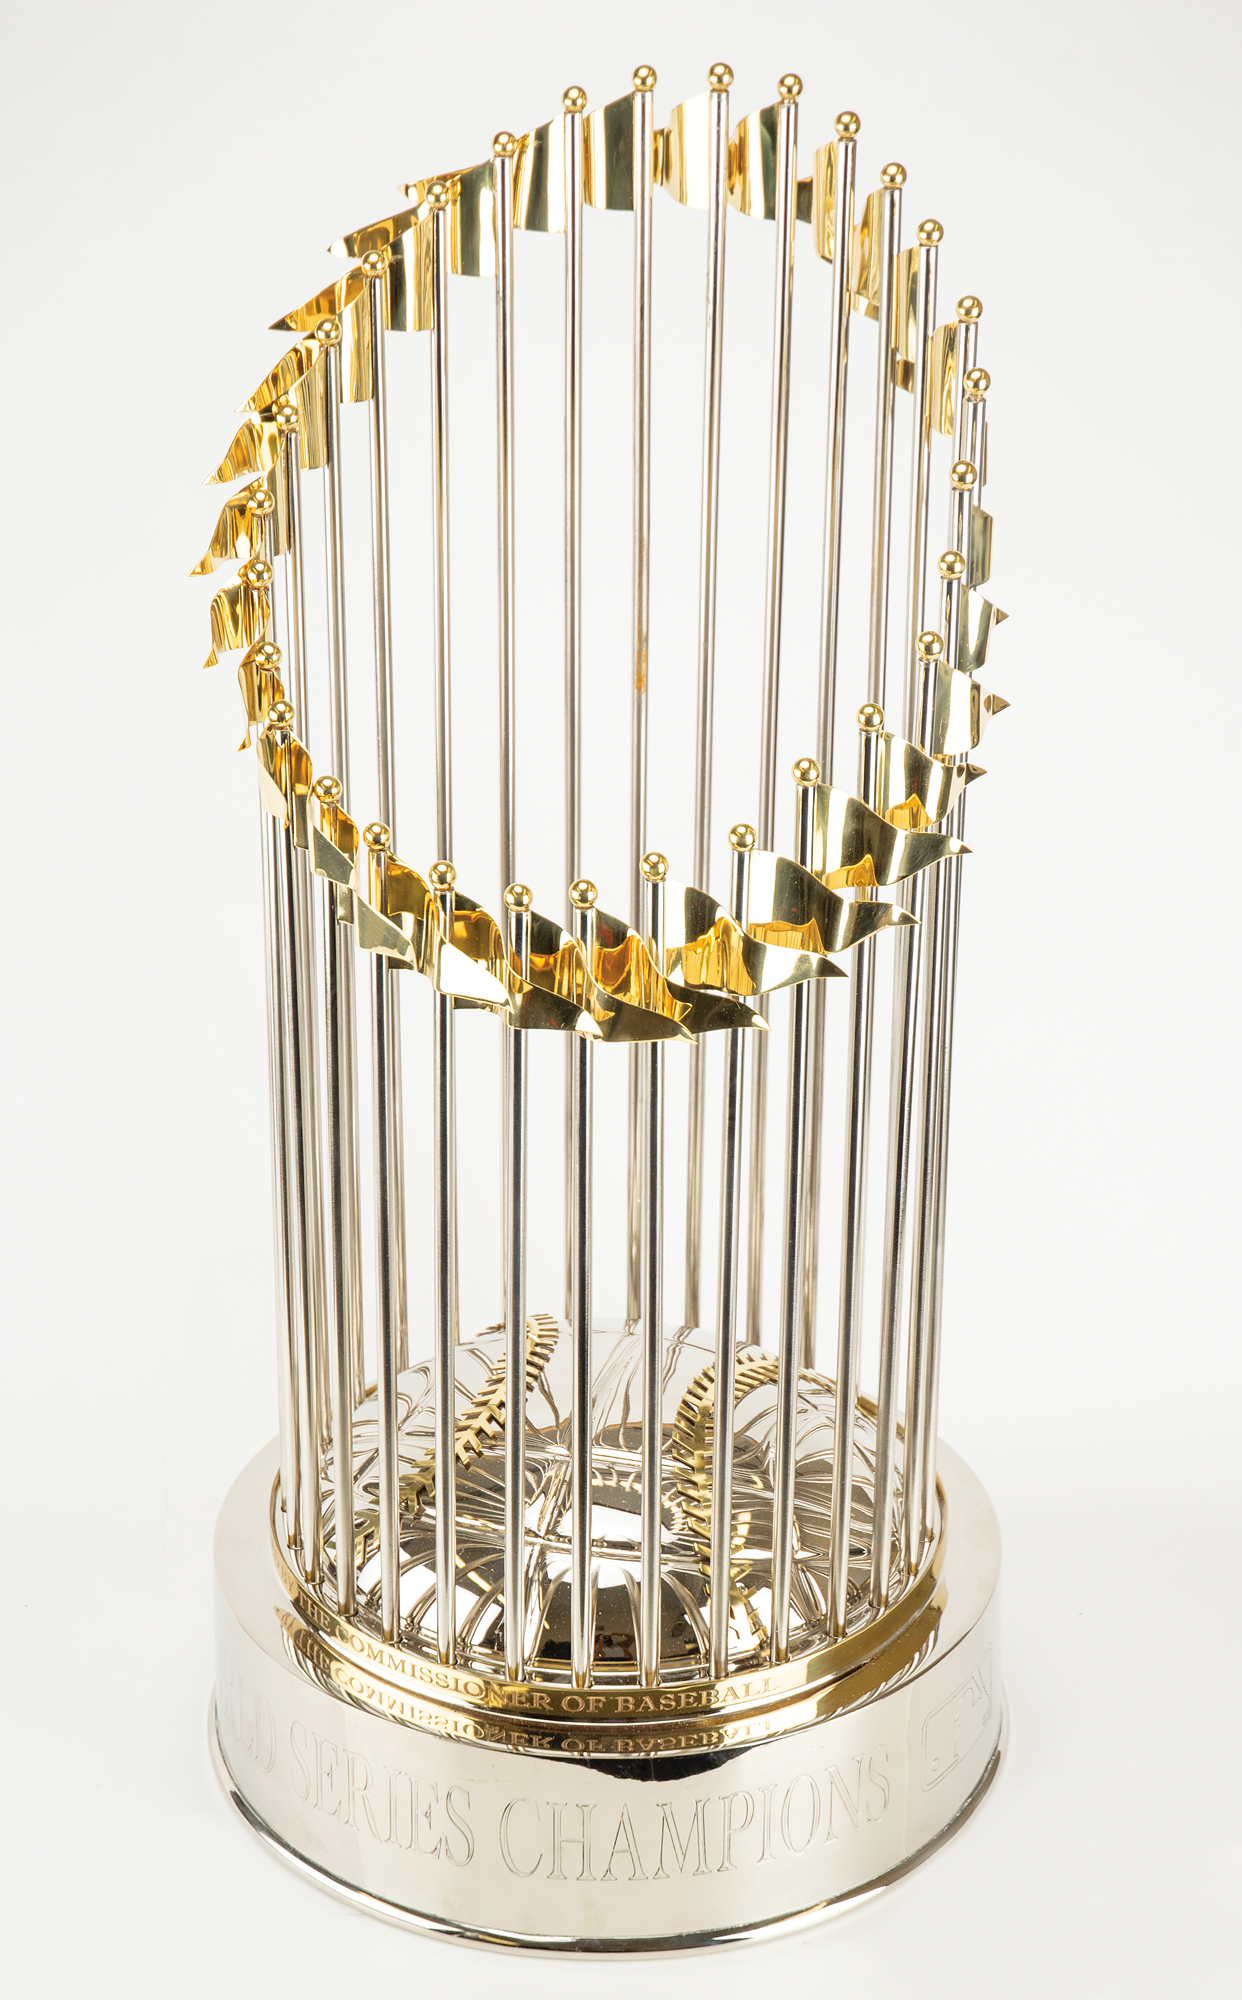 los angeles dodgers 2020 world series champions trophy replica